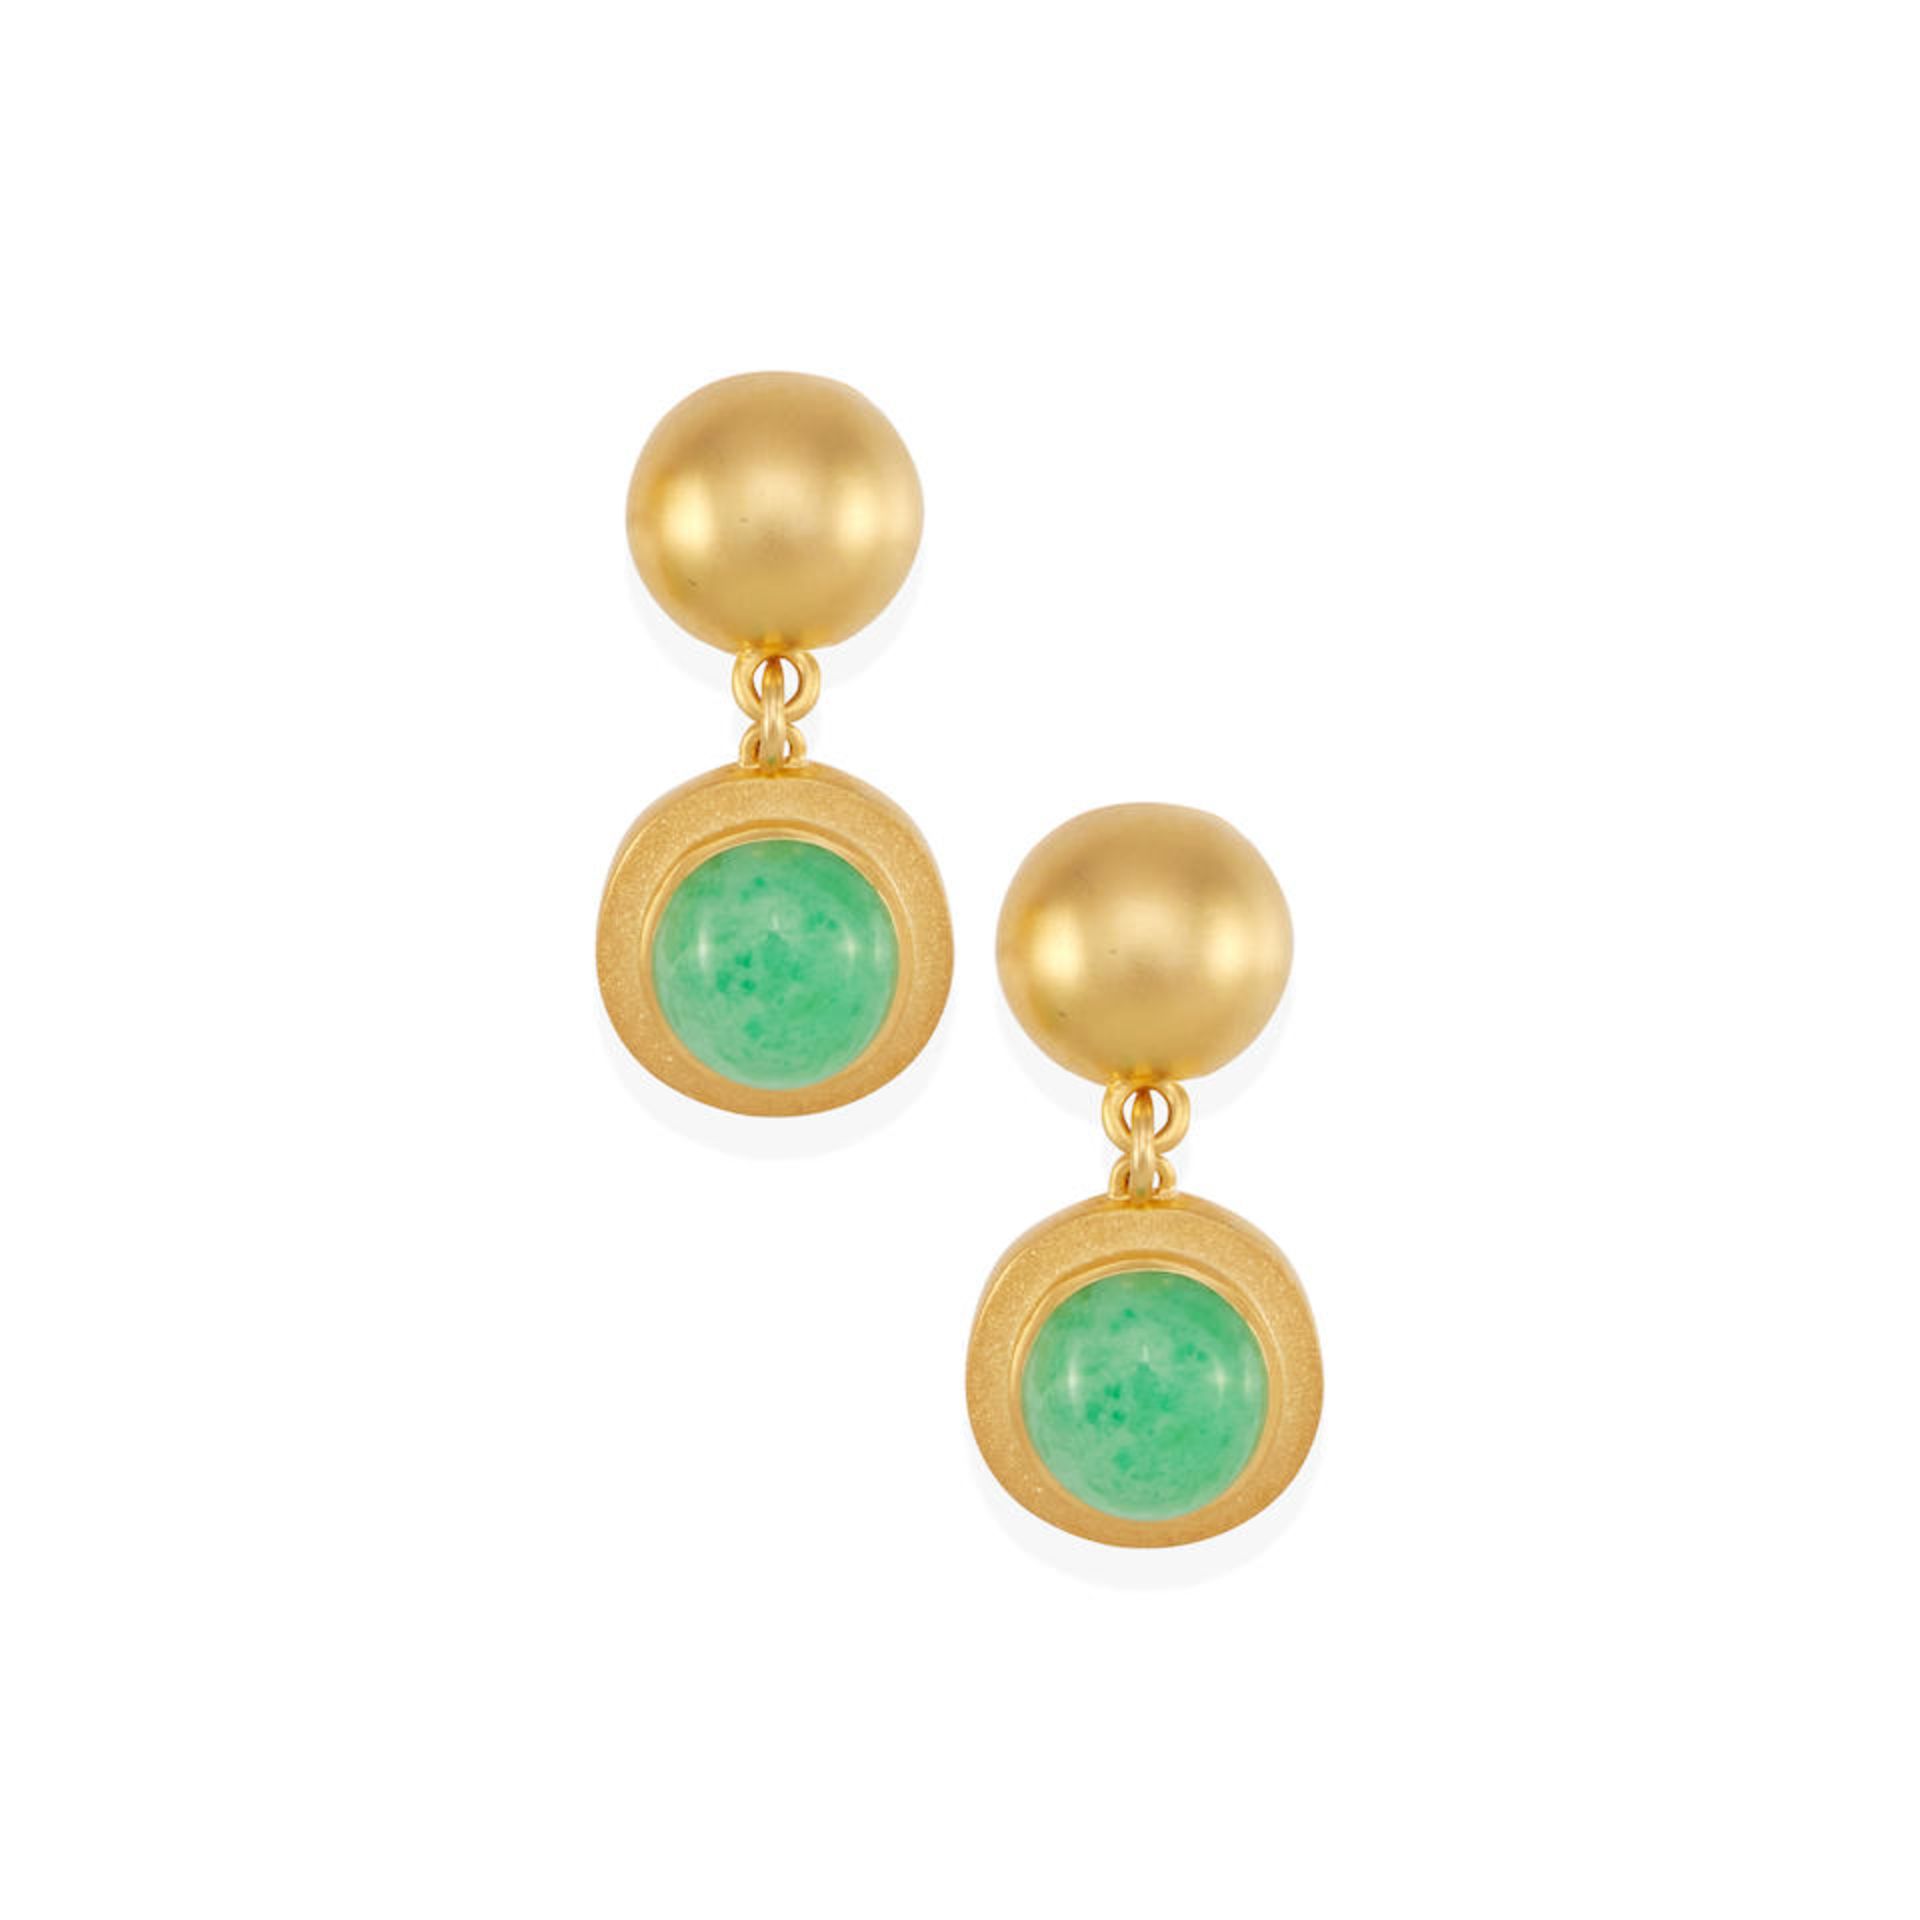 A PAIR OF 18K GOLD AND JADEITE JADE EARCLIPS